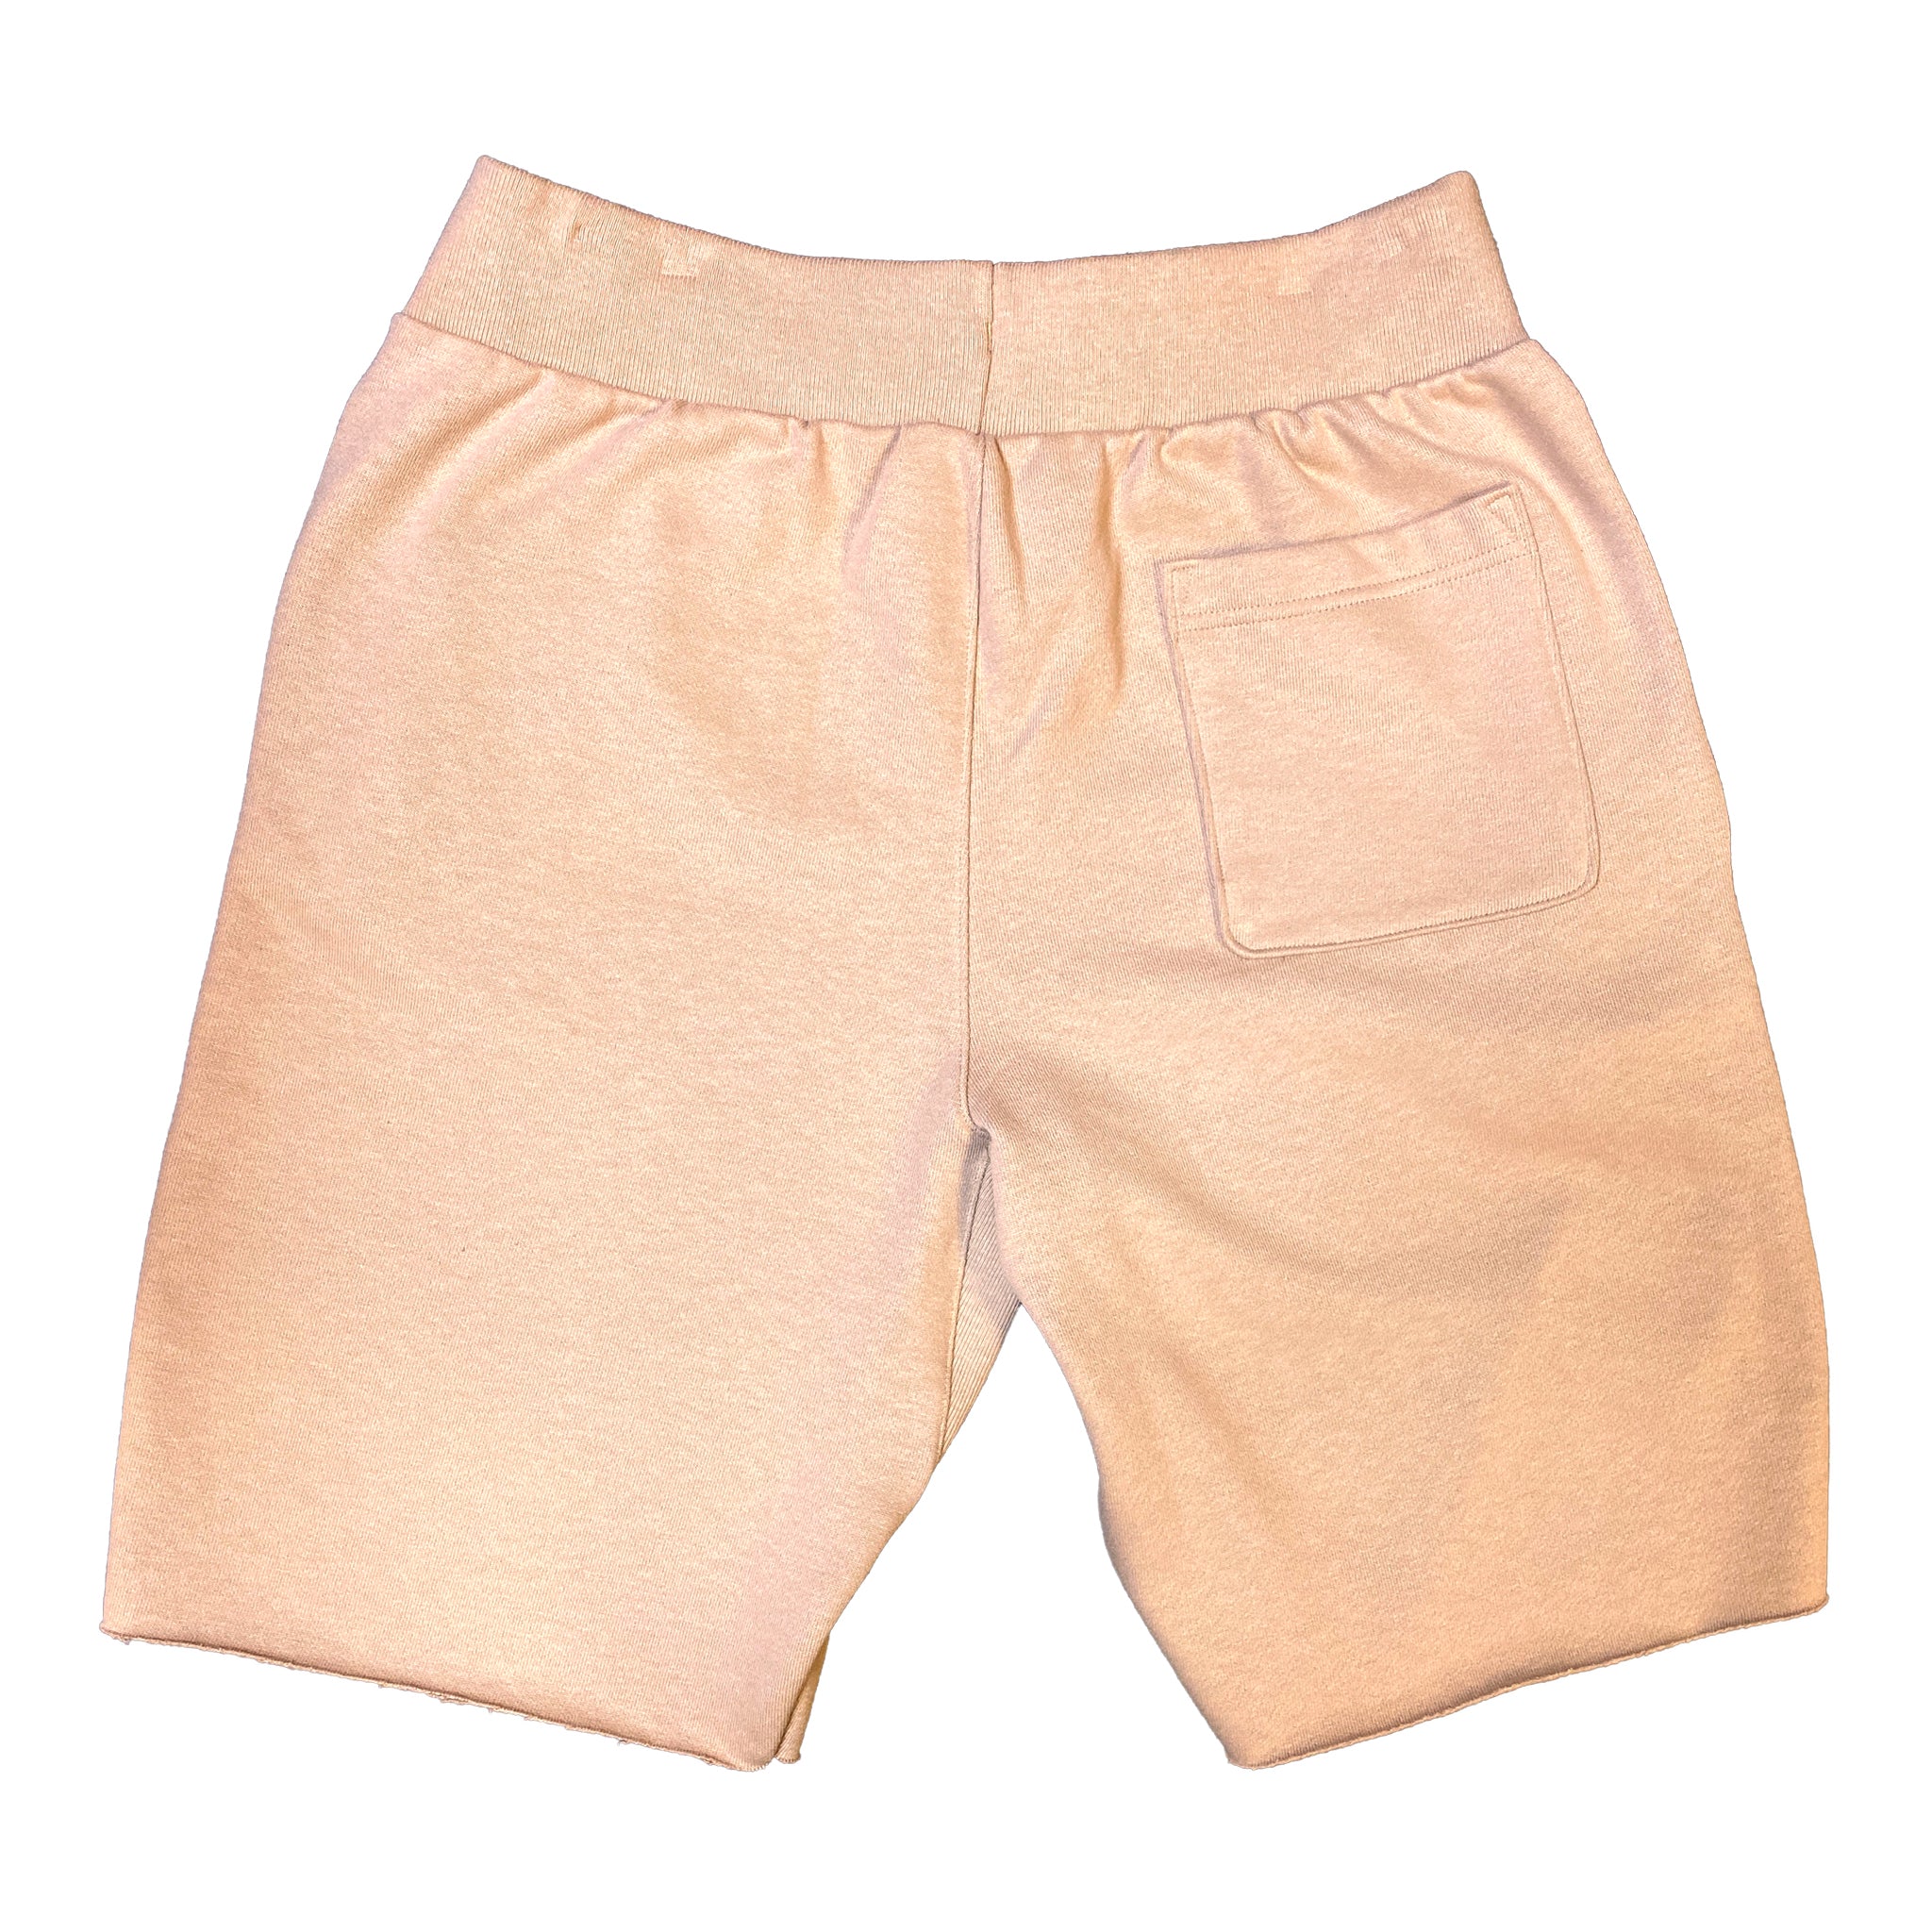 Champion Men's Reverse Weave Cut Off Shorts – That Shoe Store and More